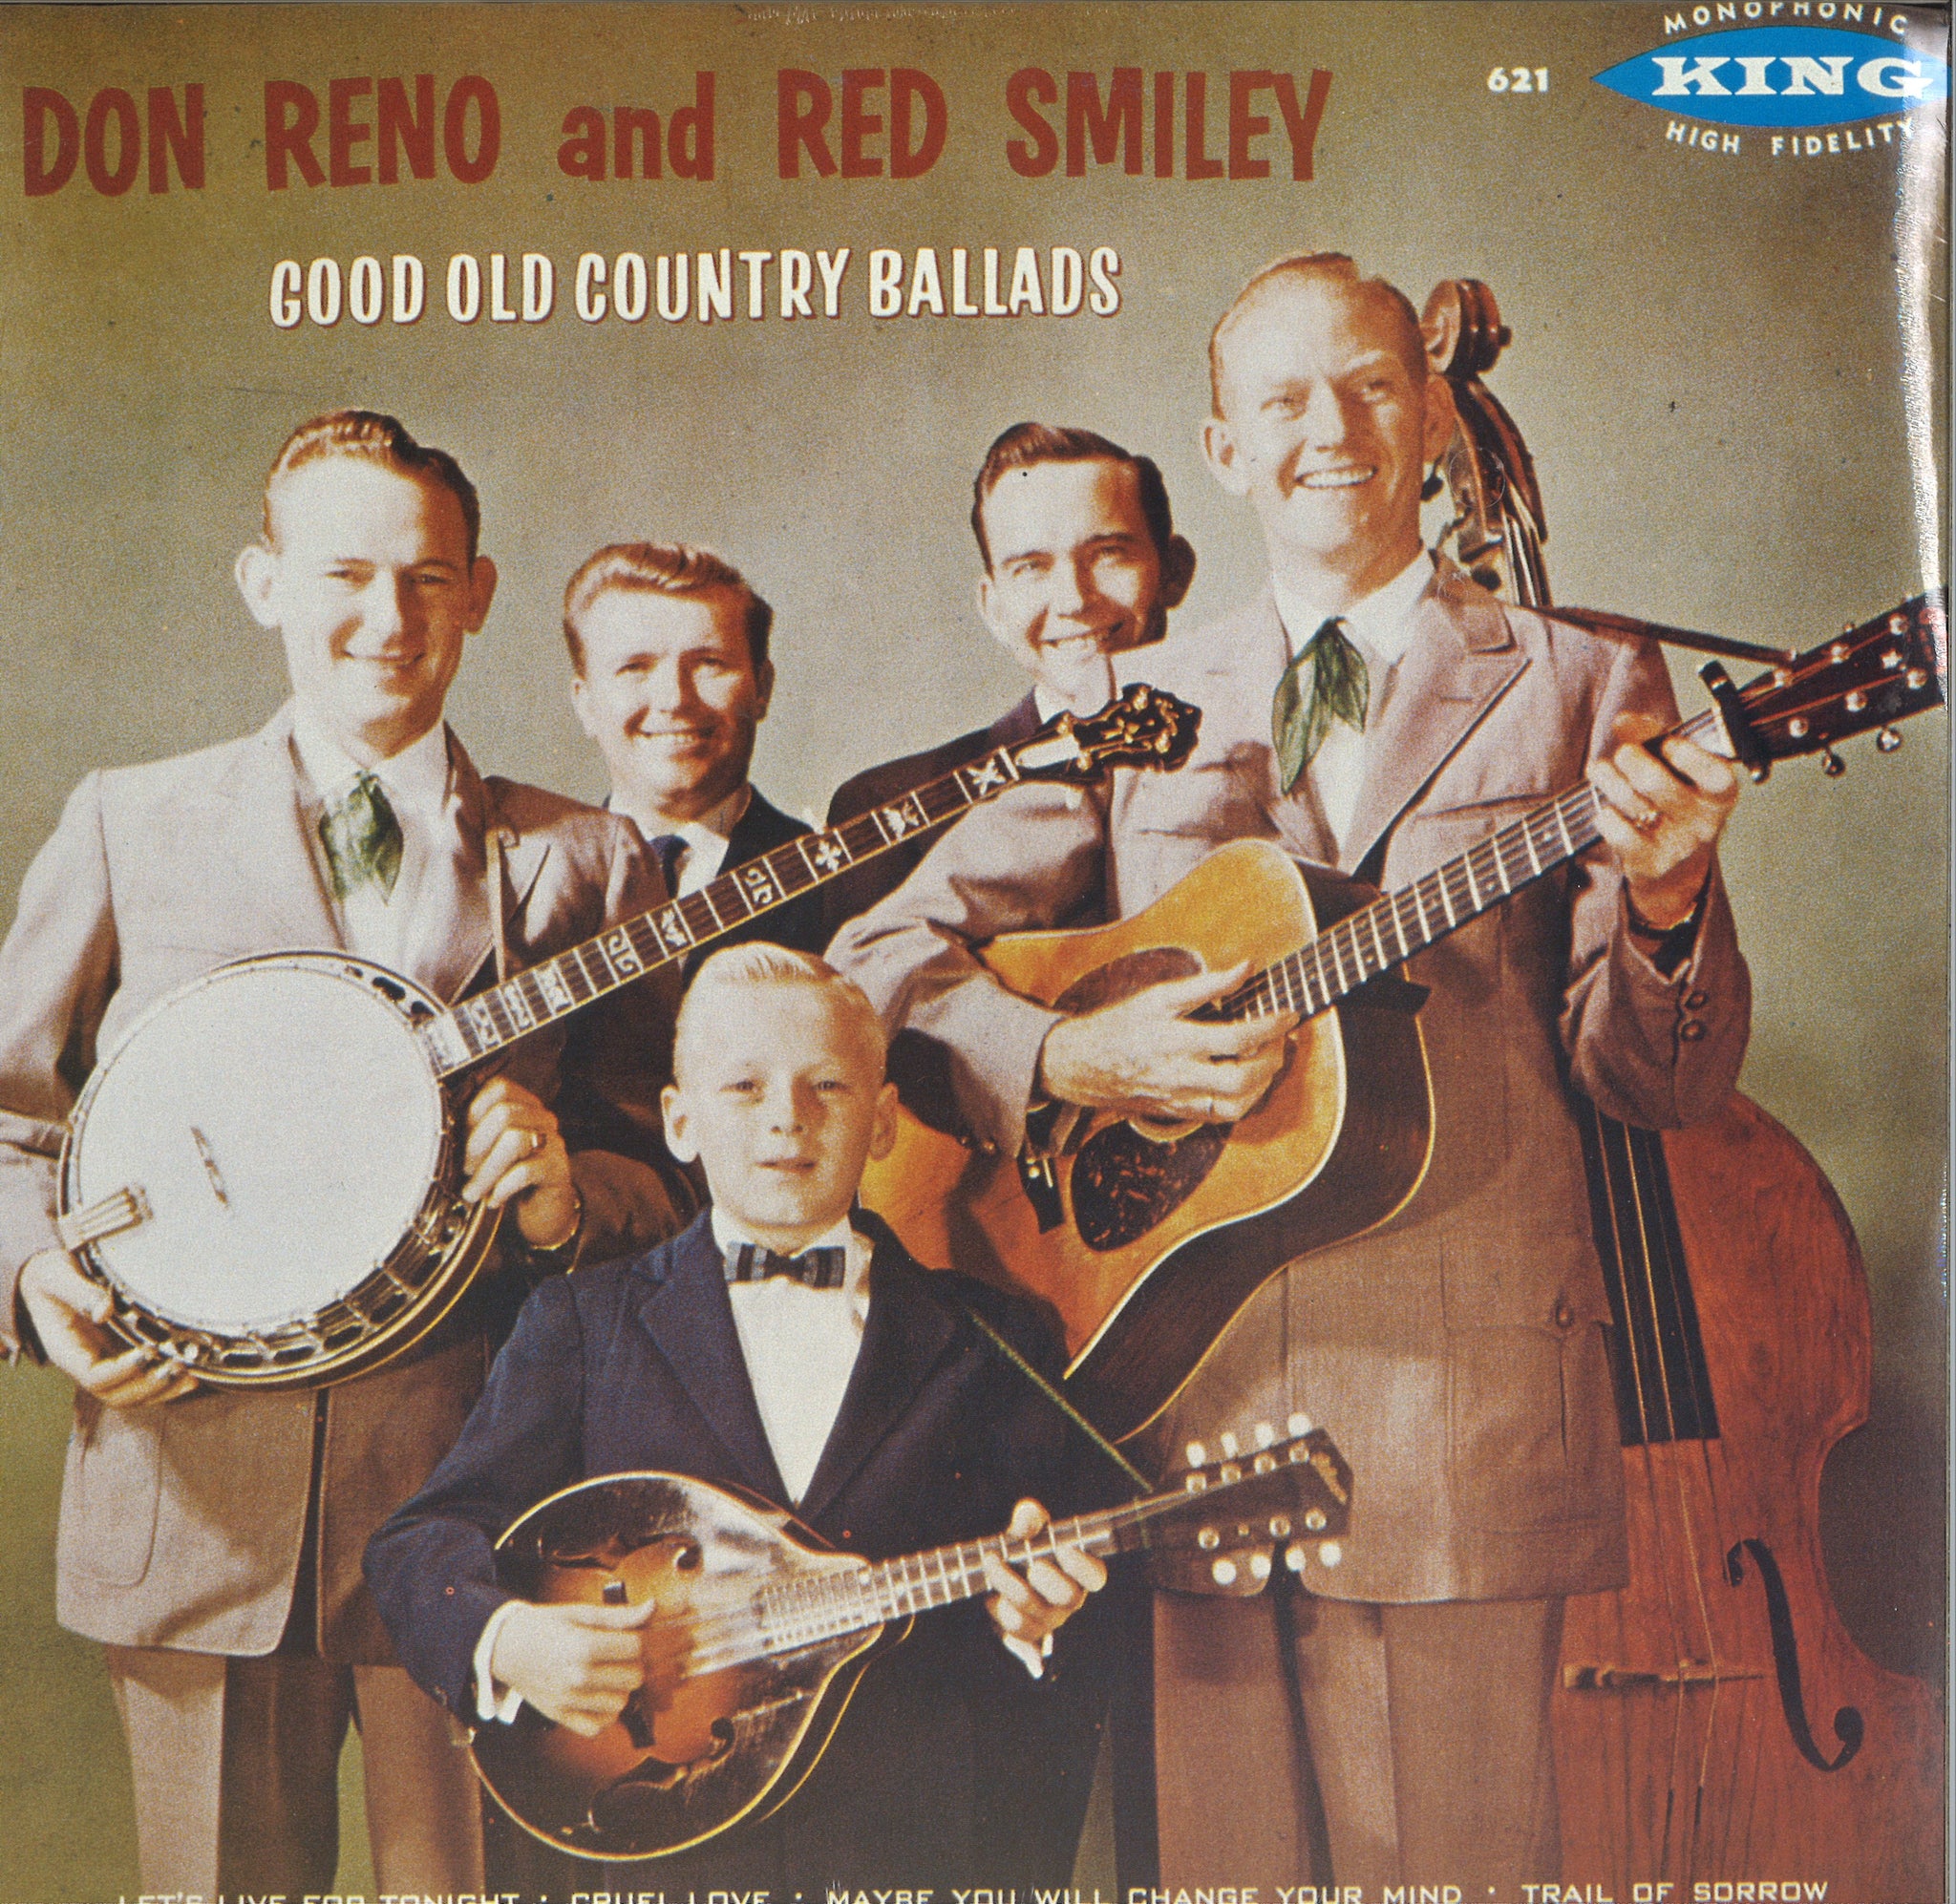 Reno & Smiley Good Old Country Ballads